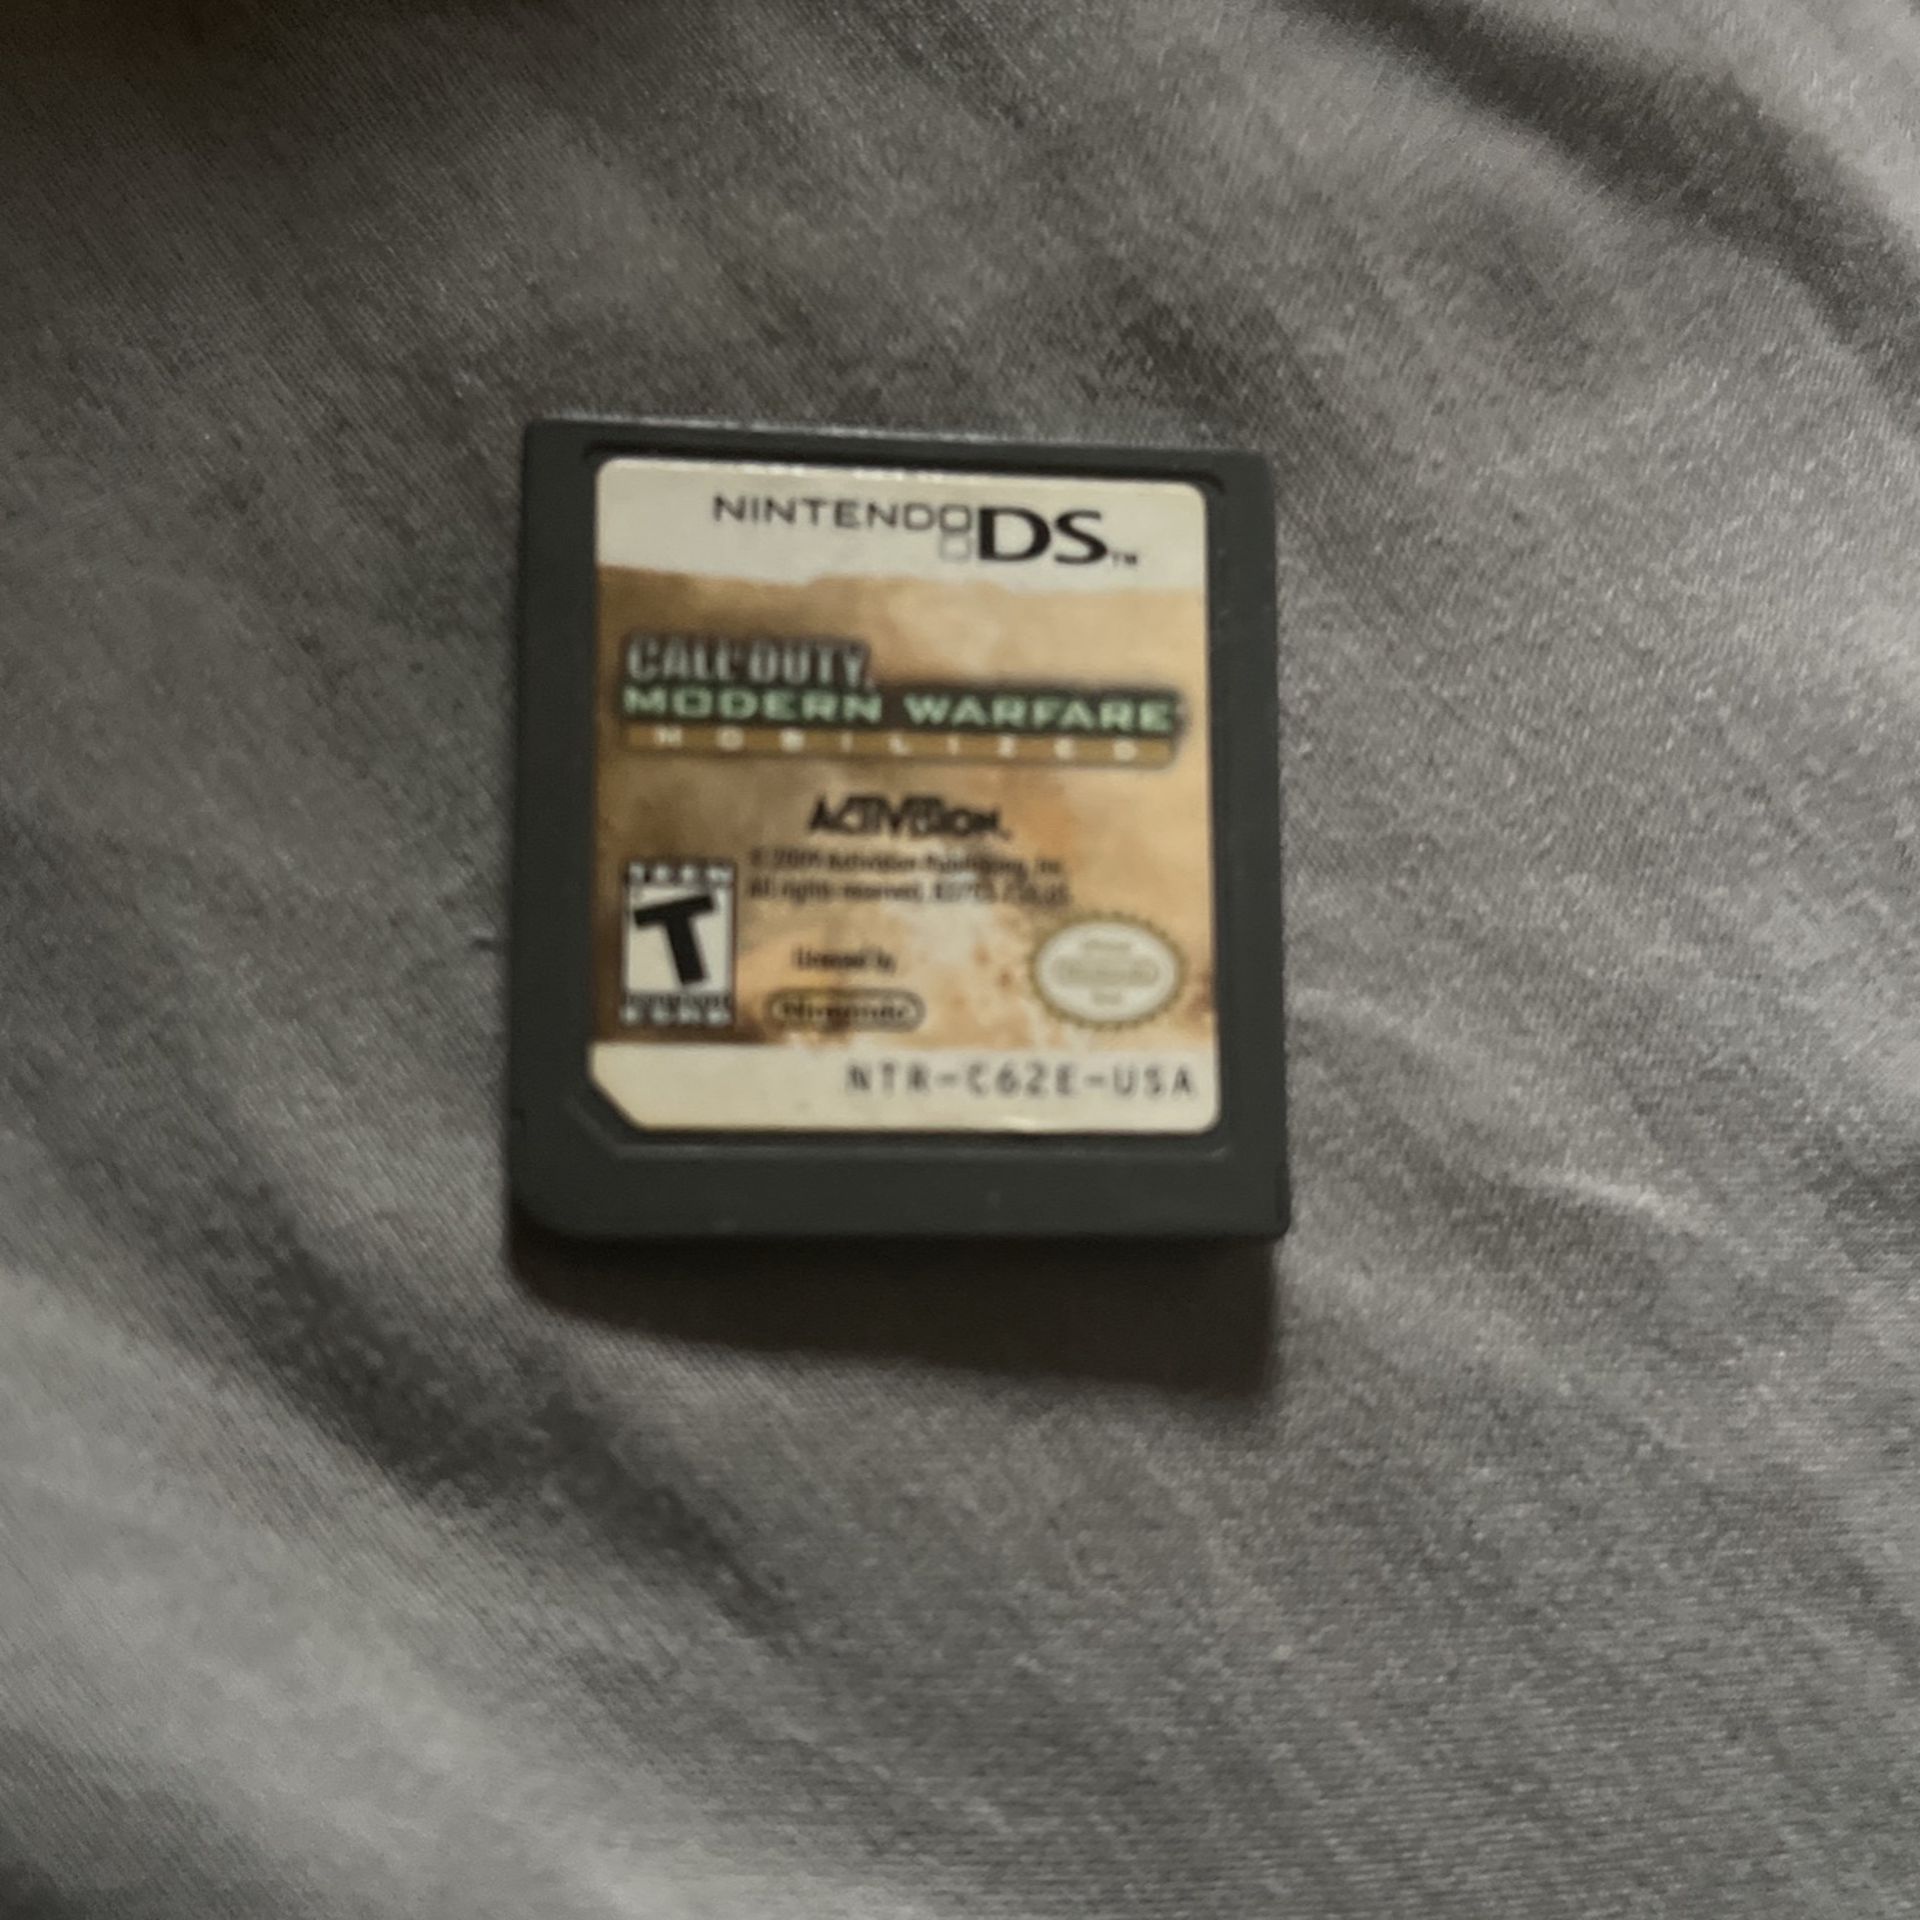 Call Of Duty Moder Warfare for Nintendo Ds